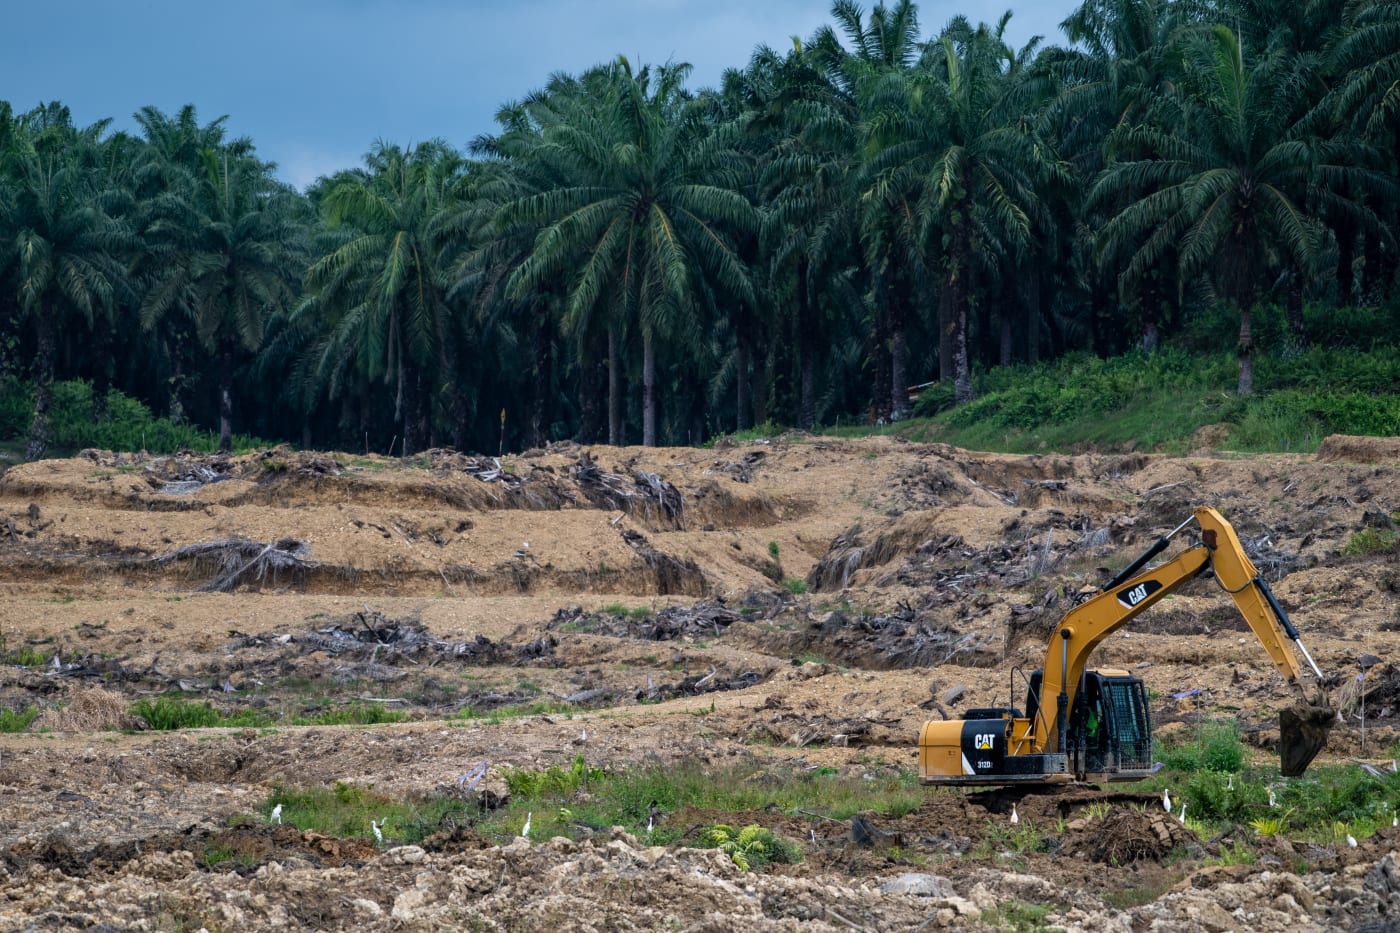 A digger ploughs deforested land on an oil palm plantation in Sabah, Borneo on 26 March, 2019.